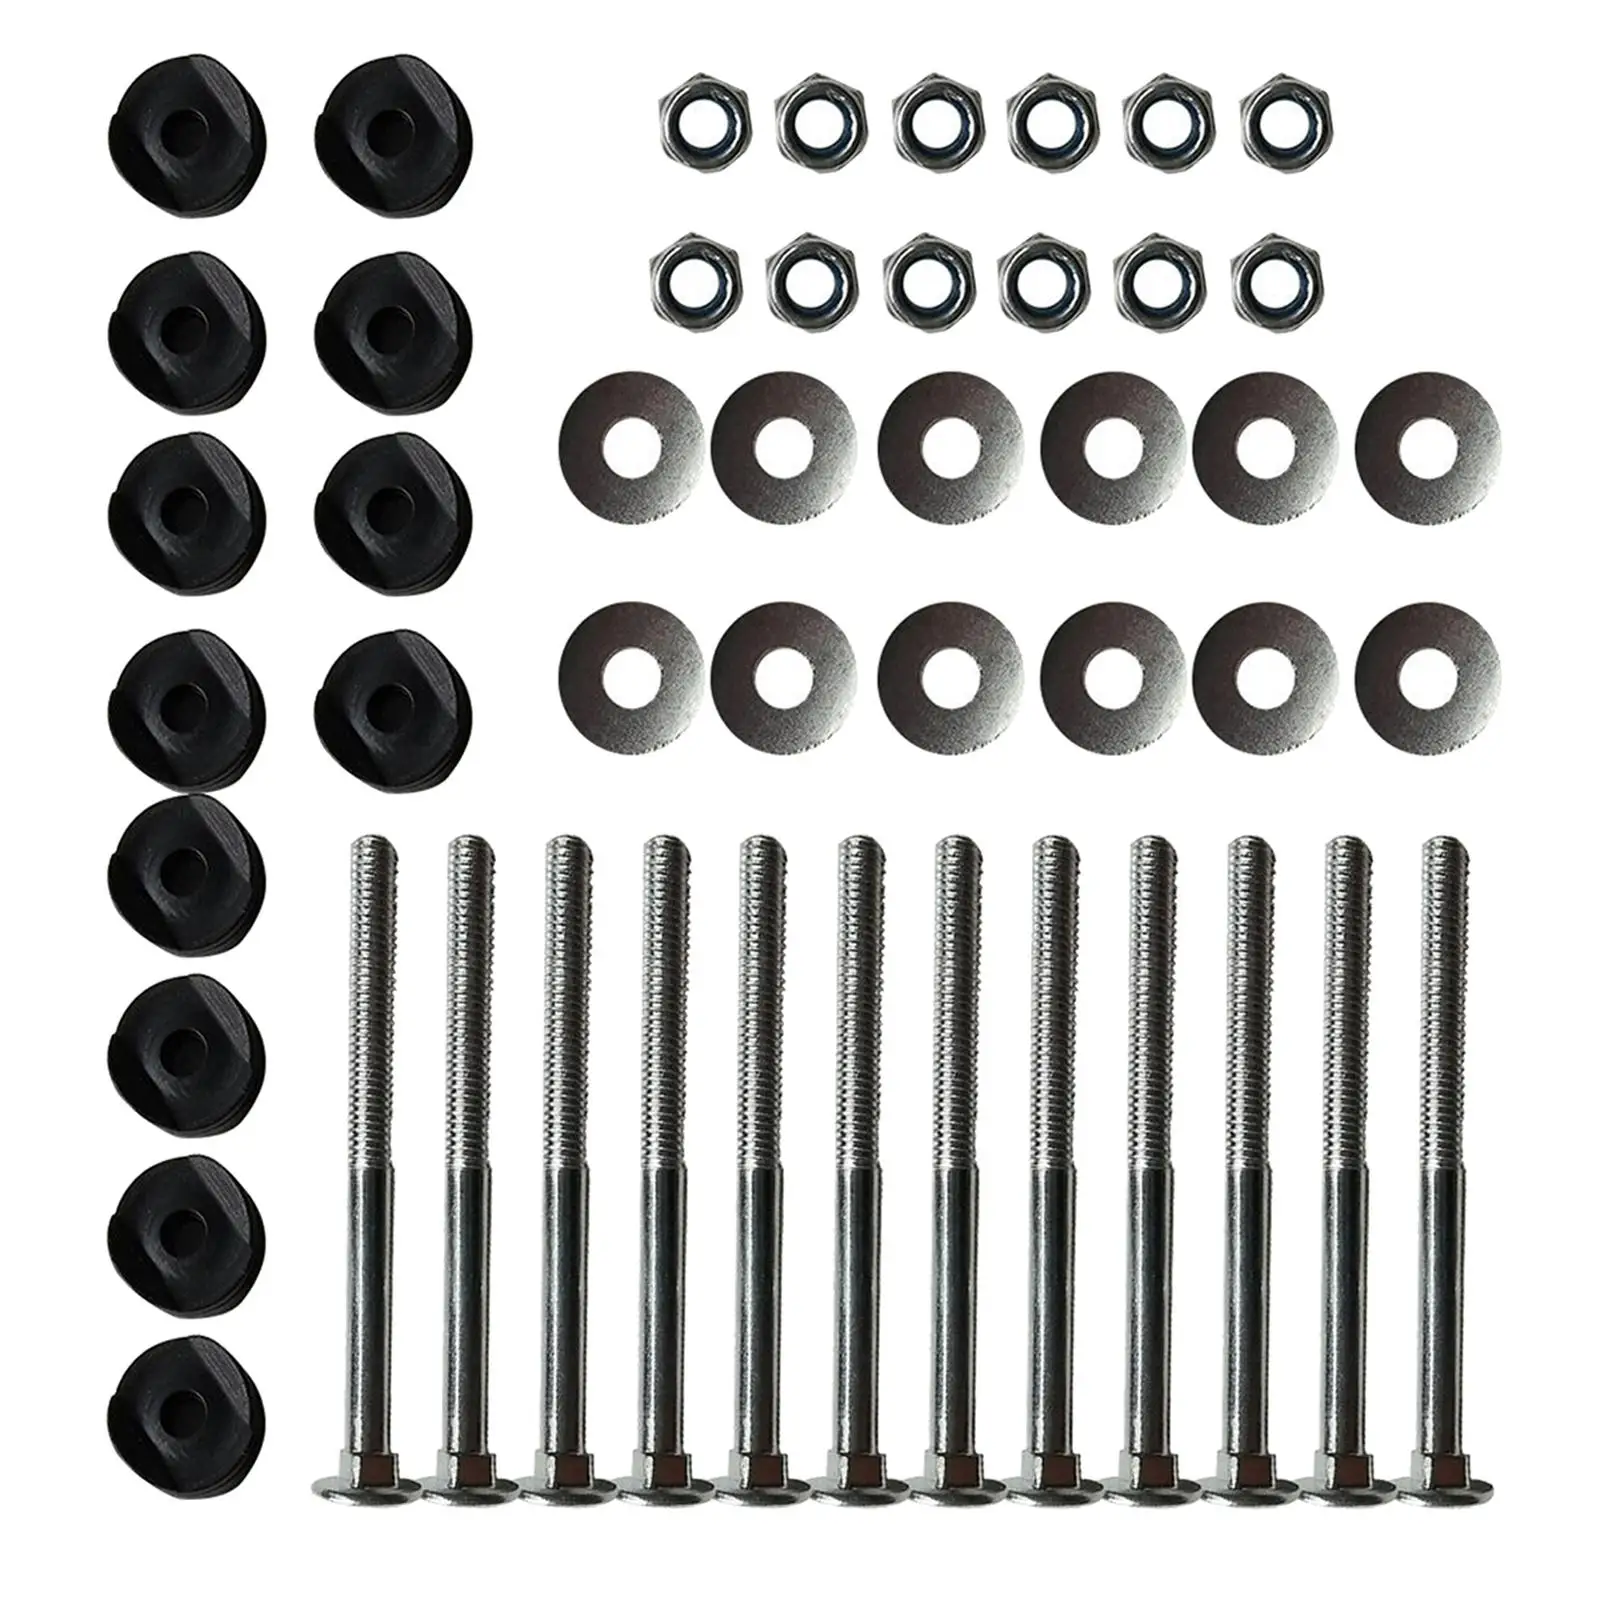 12 Pieces Trampoline Housing Pole Gap Spacer Safety Replacement Parts